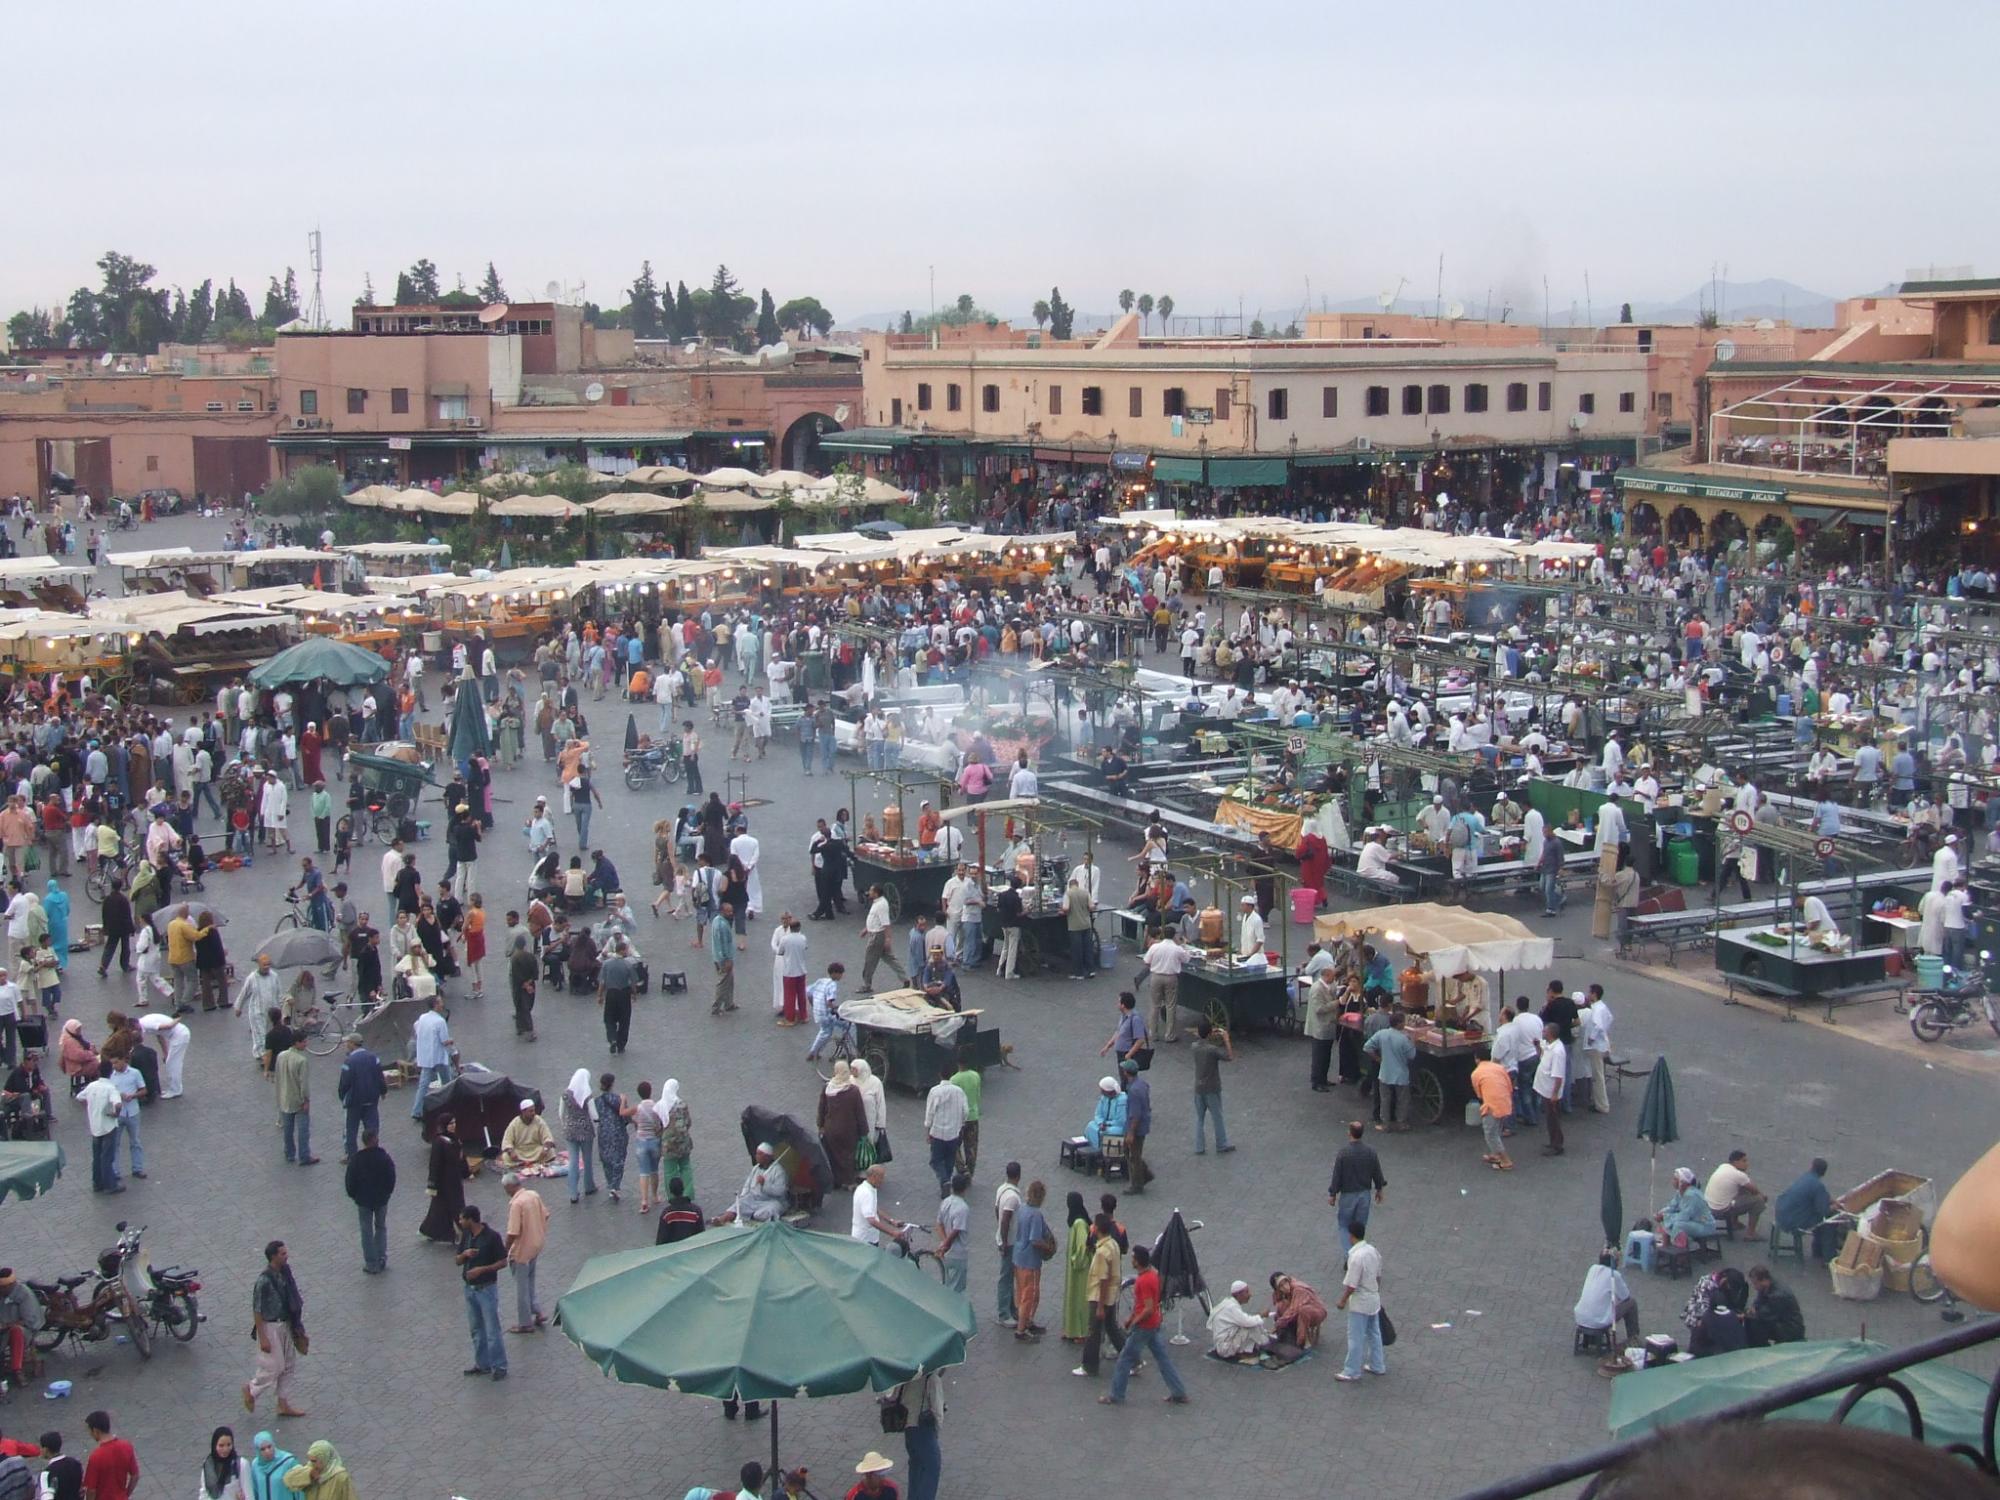 Marrakech’s Jemaa el-Fnaa market square home to snake charmers, fortune tellers